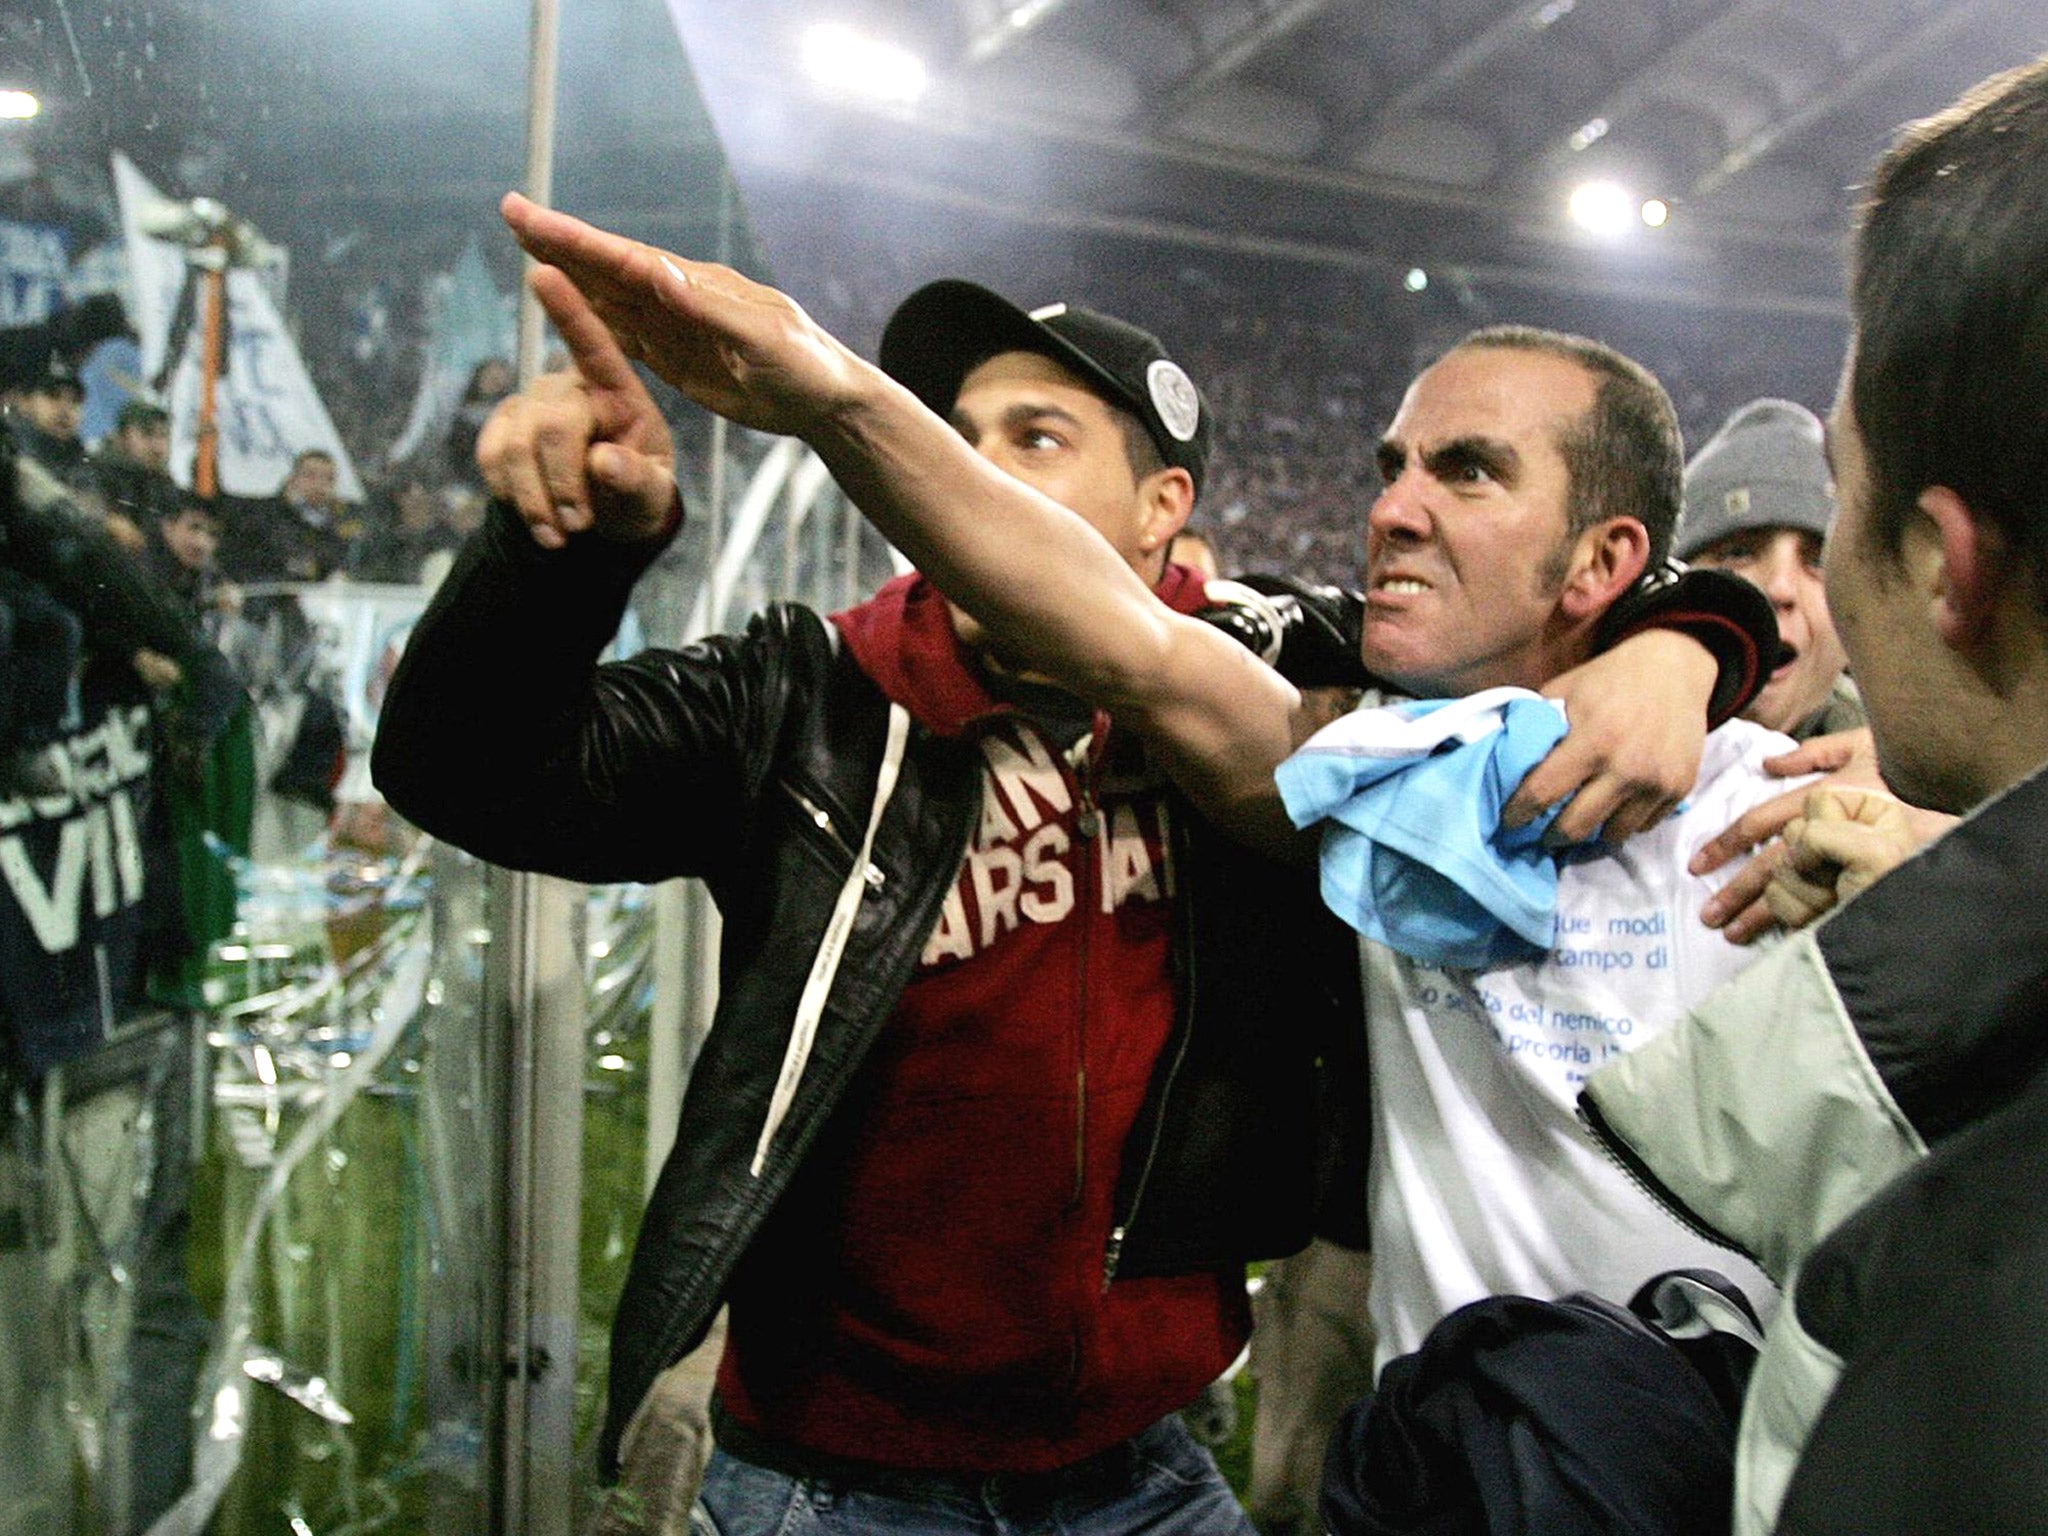 Paolo Di Canio gestures towards fans during his time at Lazio